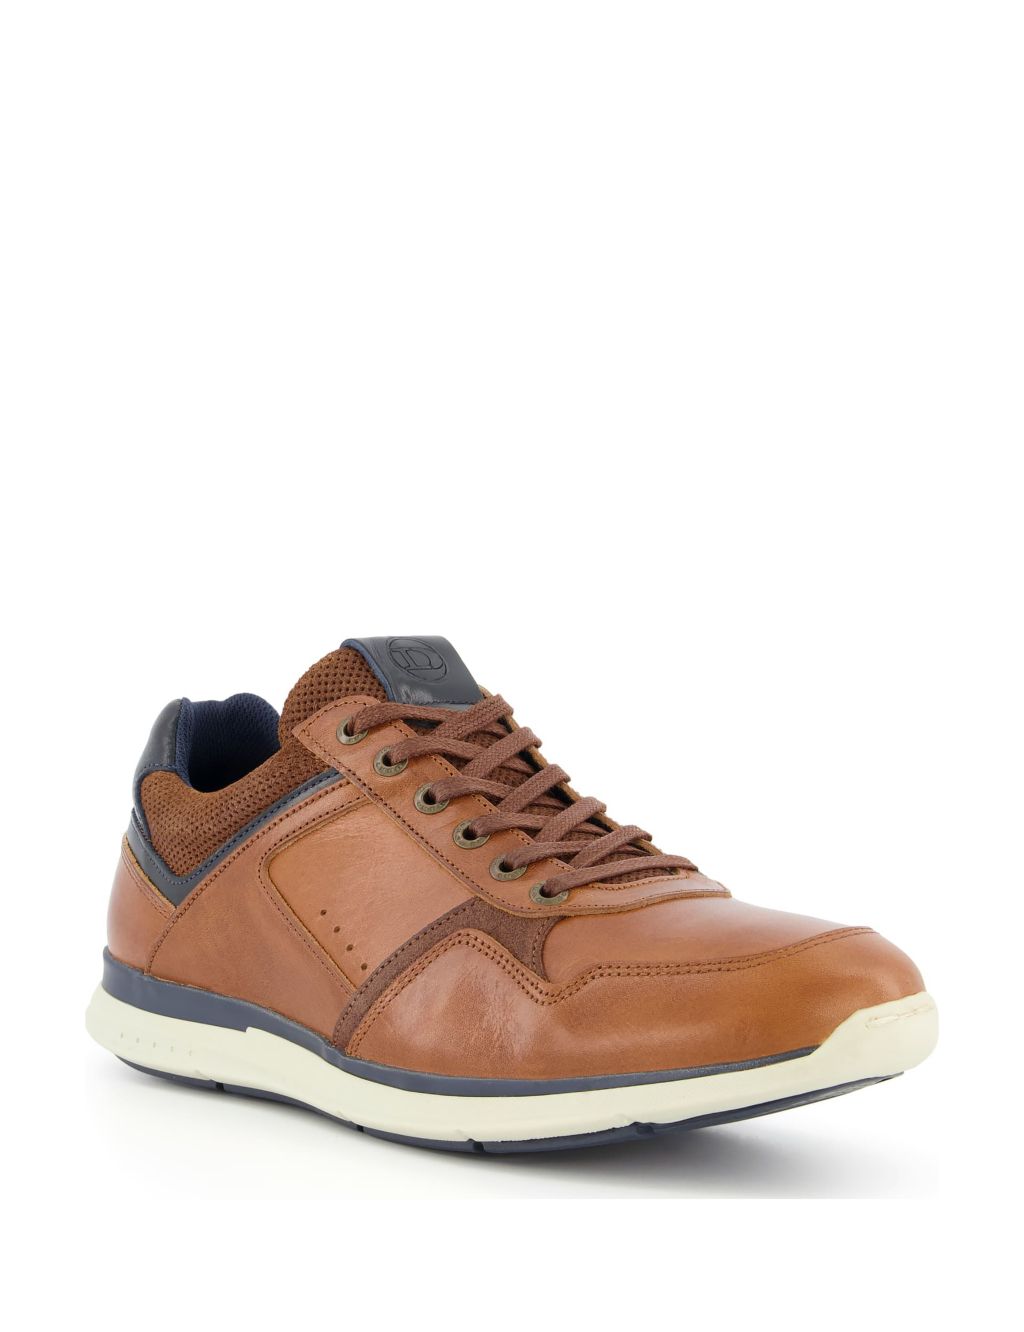 Leather Lace-Up Trainers | Dune London | M&S